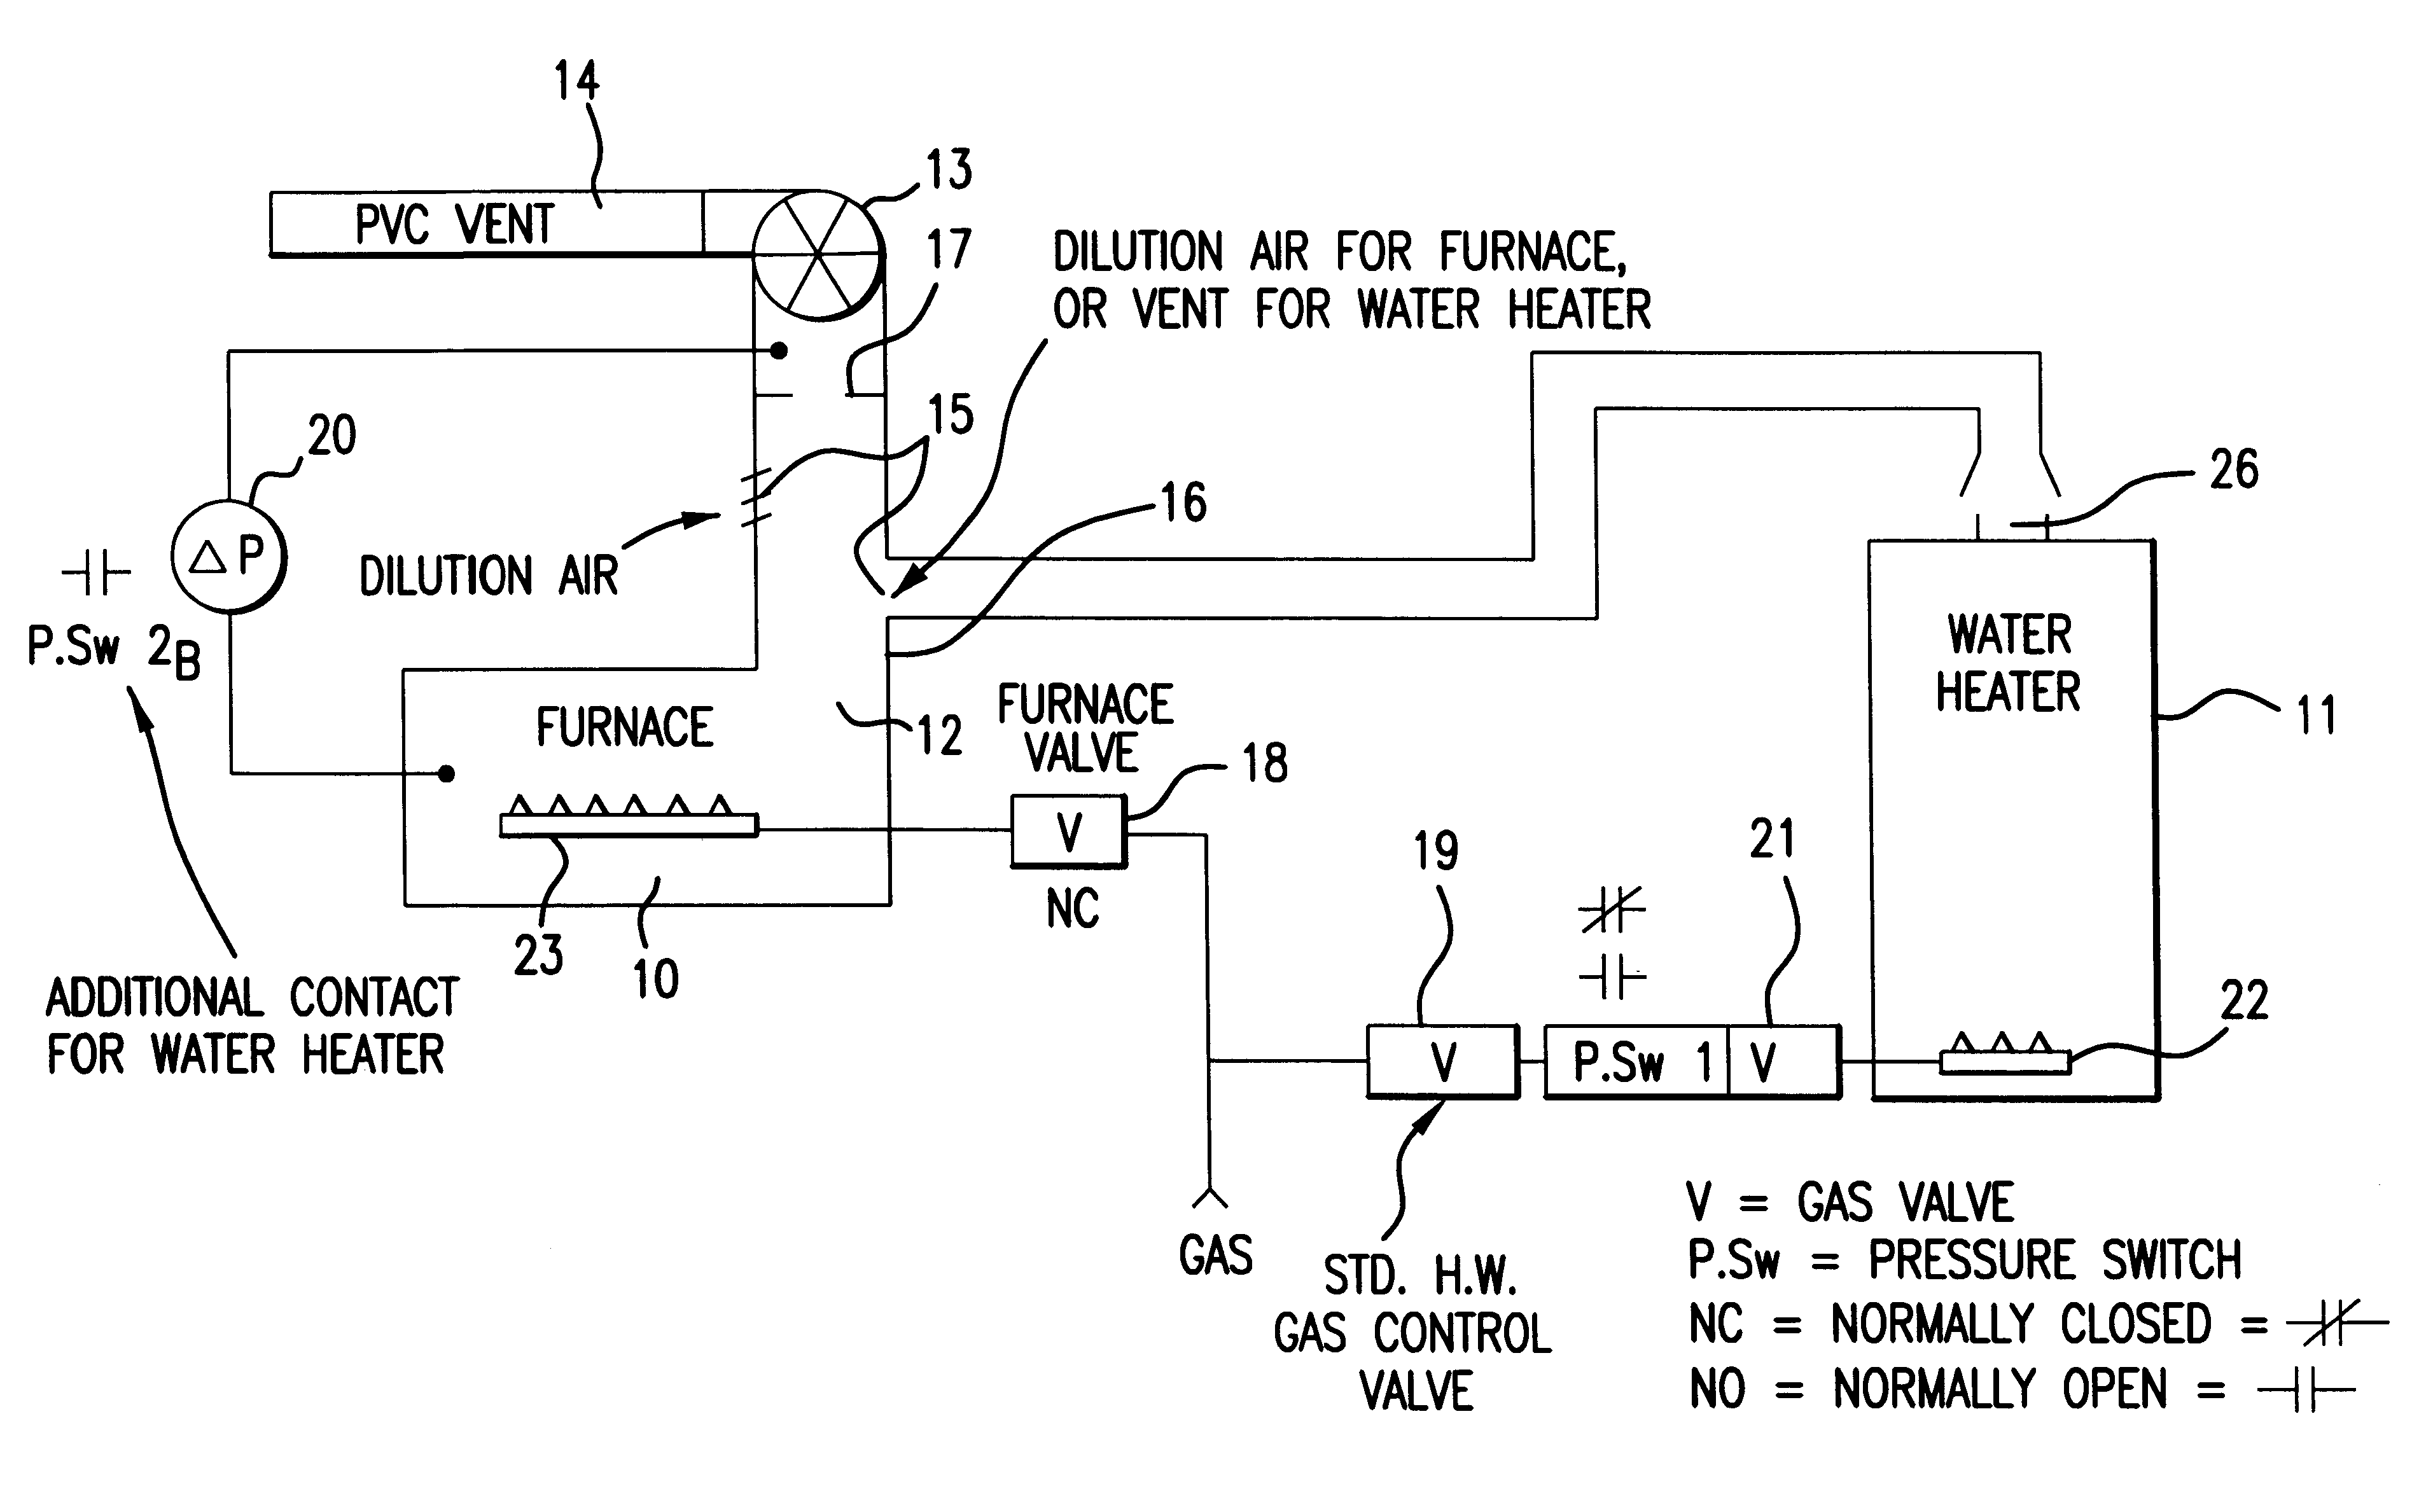 Common venting of water heater and induced draft furnace